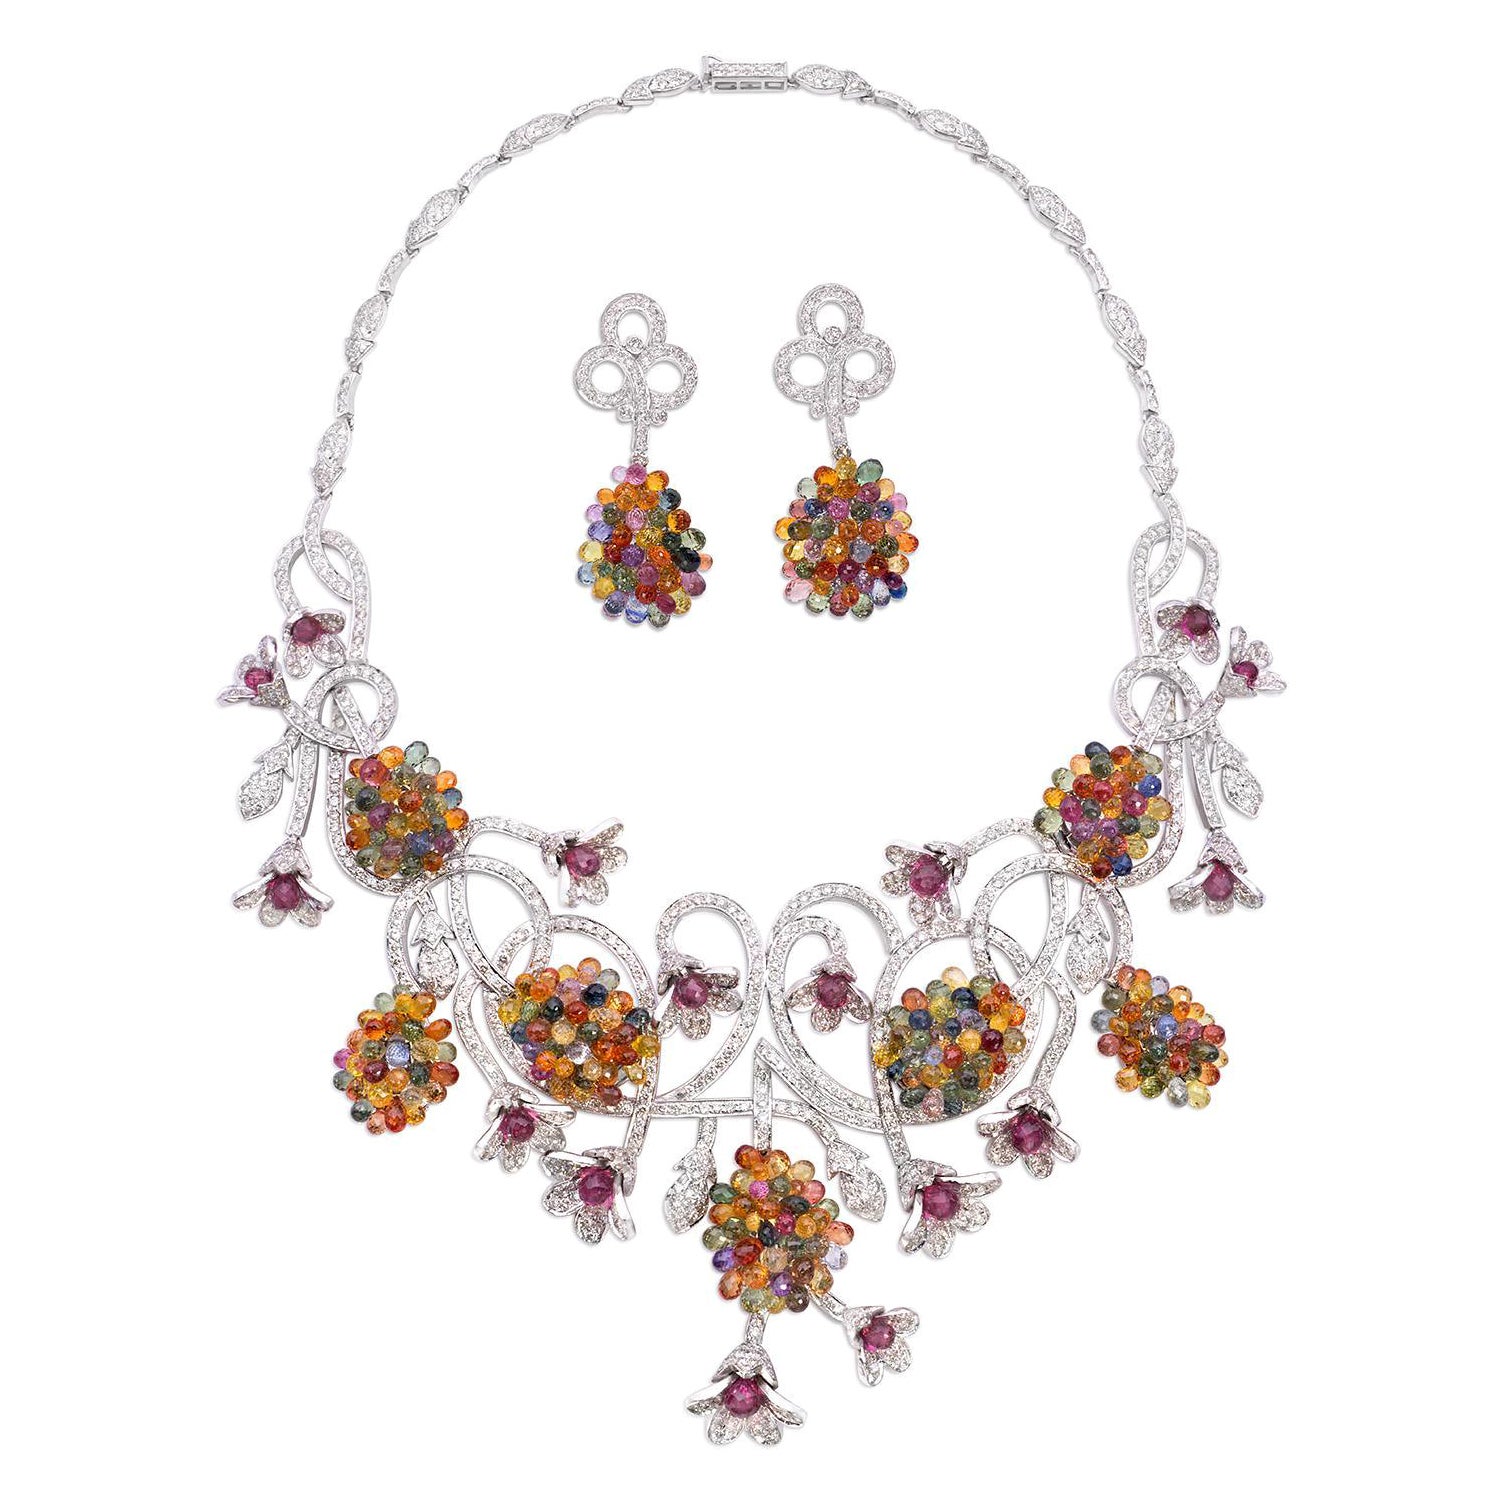 56 Carat Multi-Colored Sapphire and Diamond Necklace and Earring Set For Sale